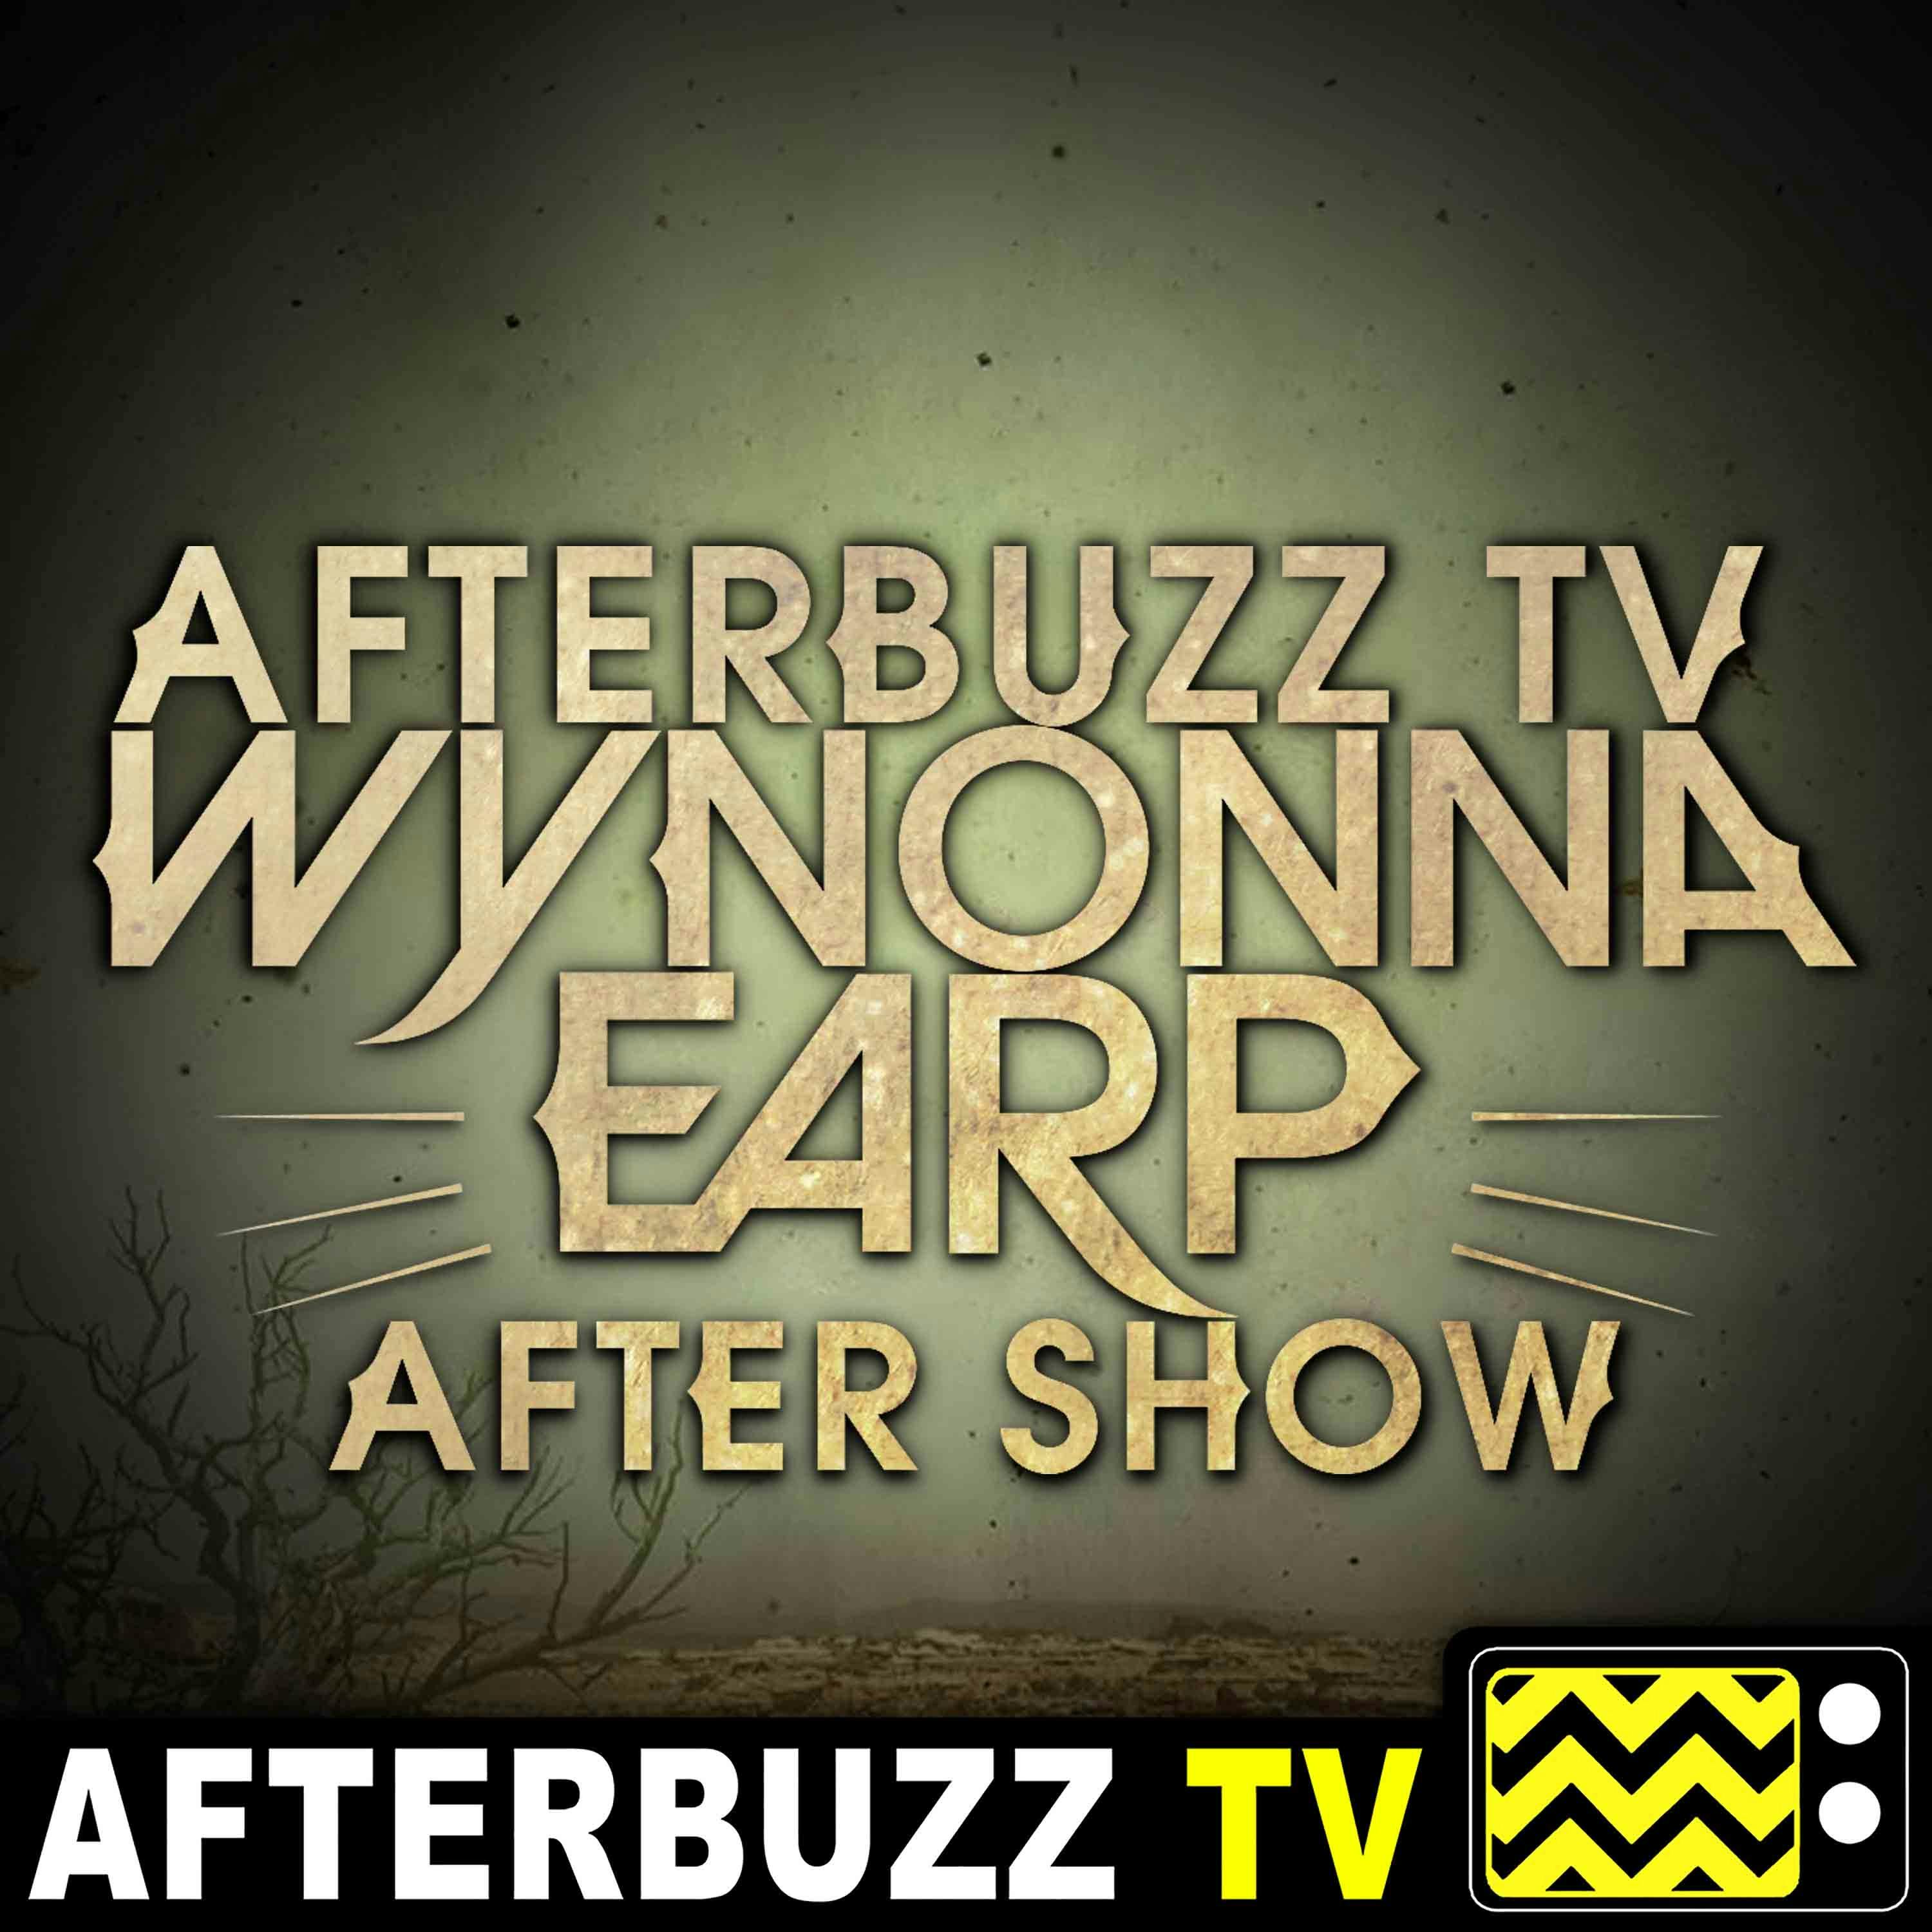 Wynonna Earp S:3 | No Cure For Crazy E:4 | AfterBuzz TV AfterShow